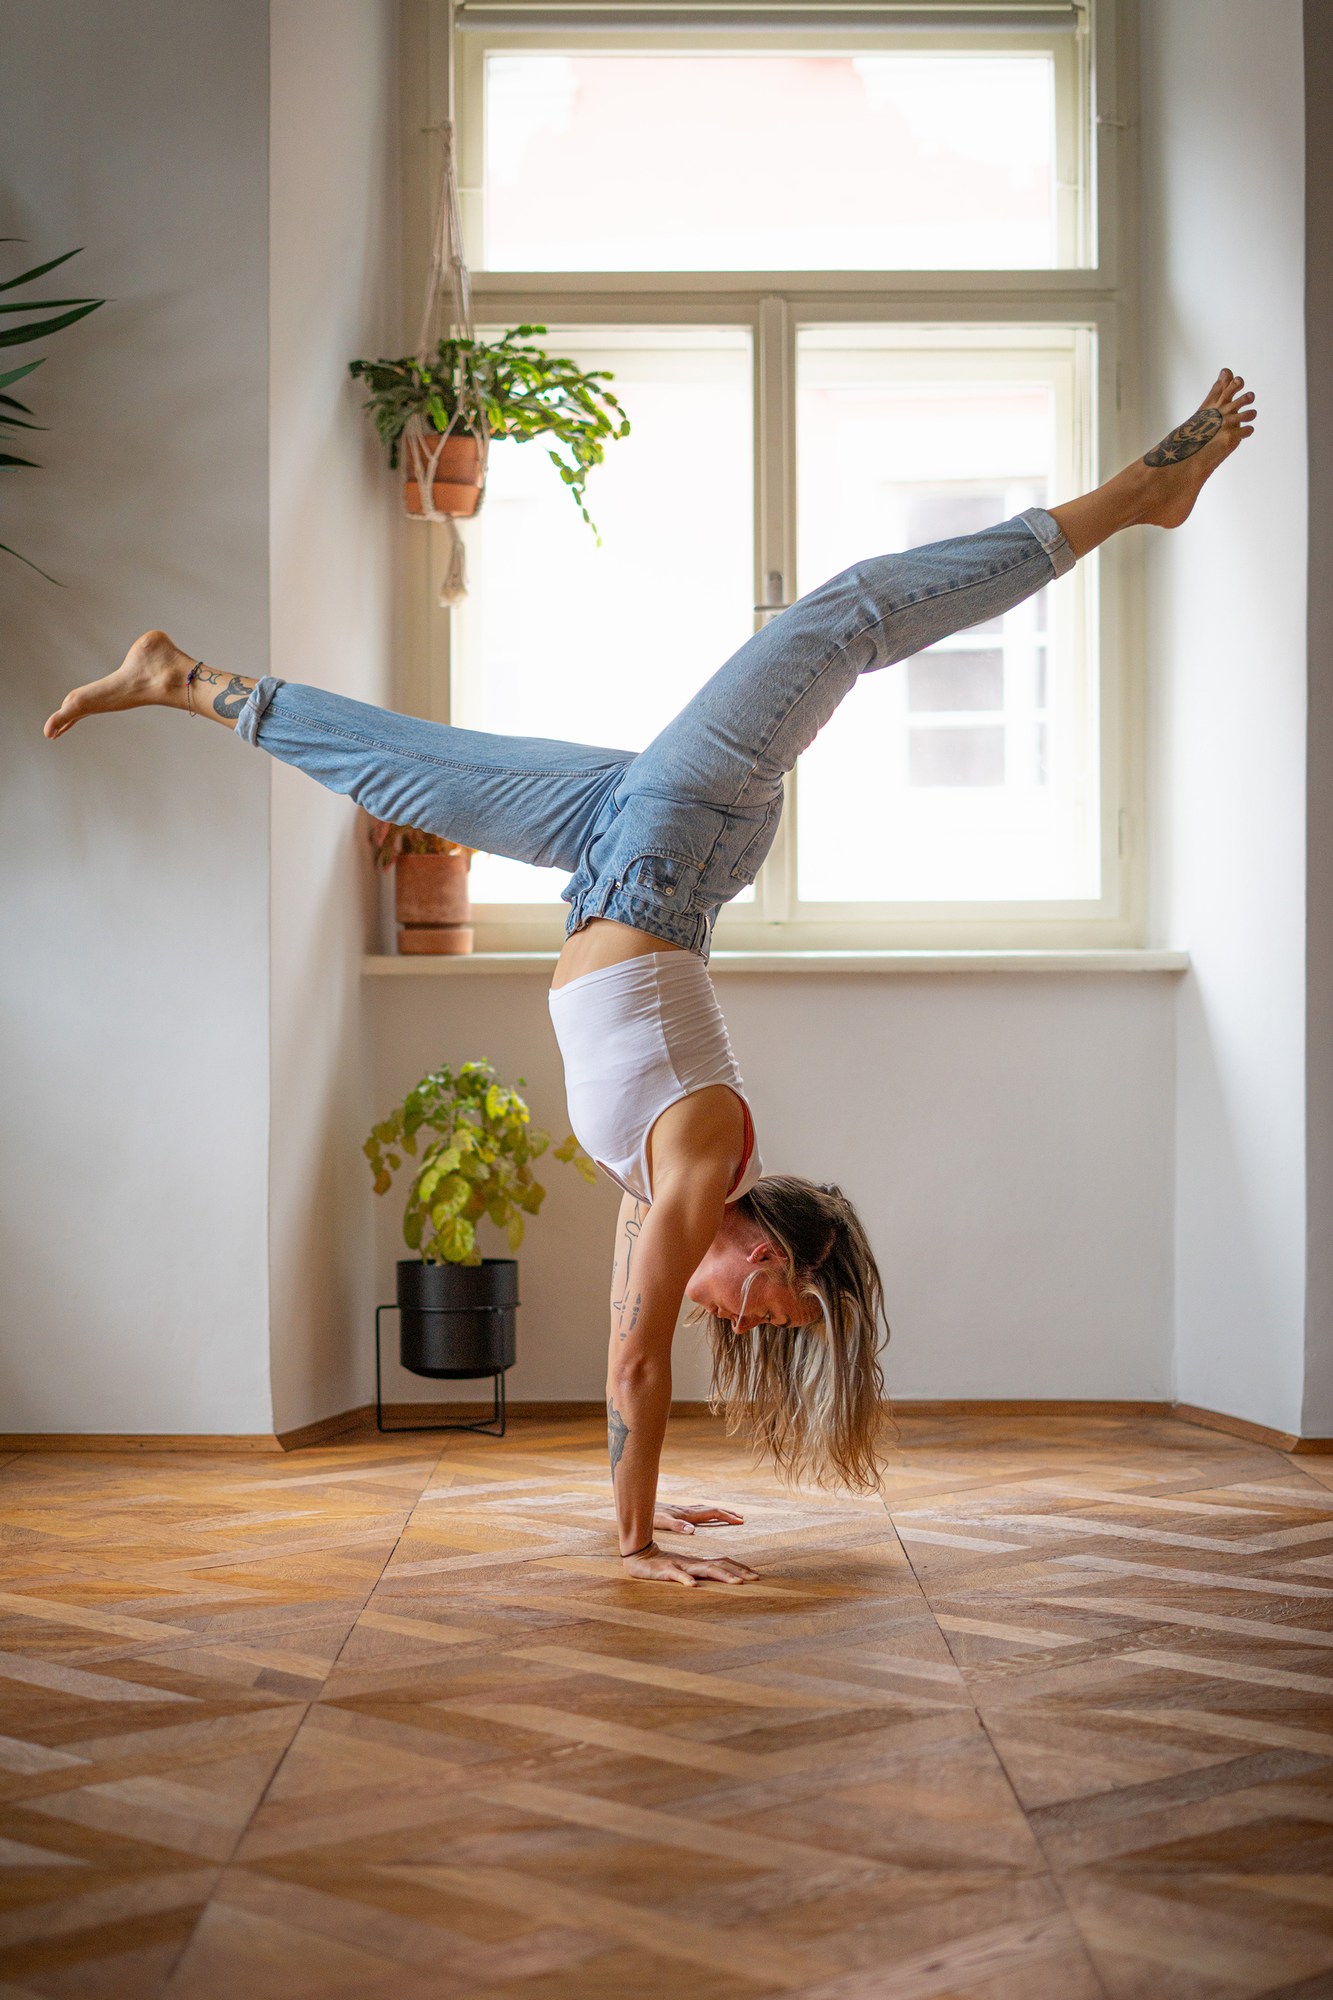 Girl doing a handstand in a room with wooden floor wearing jeans.